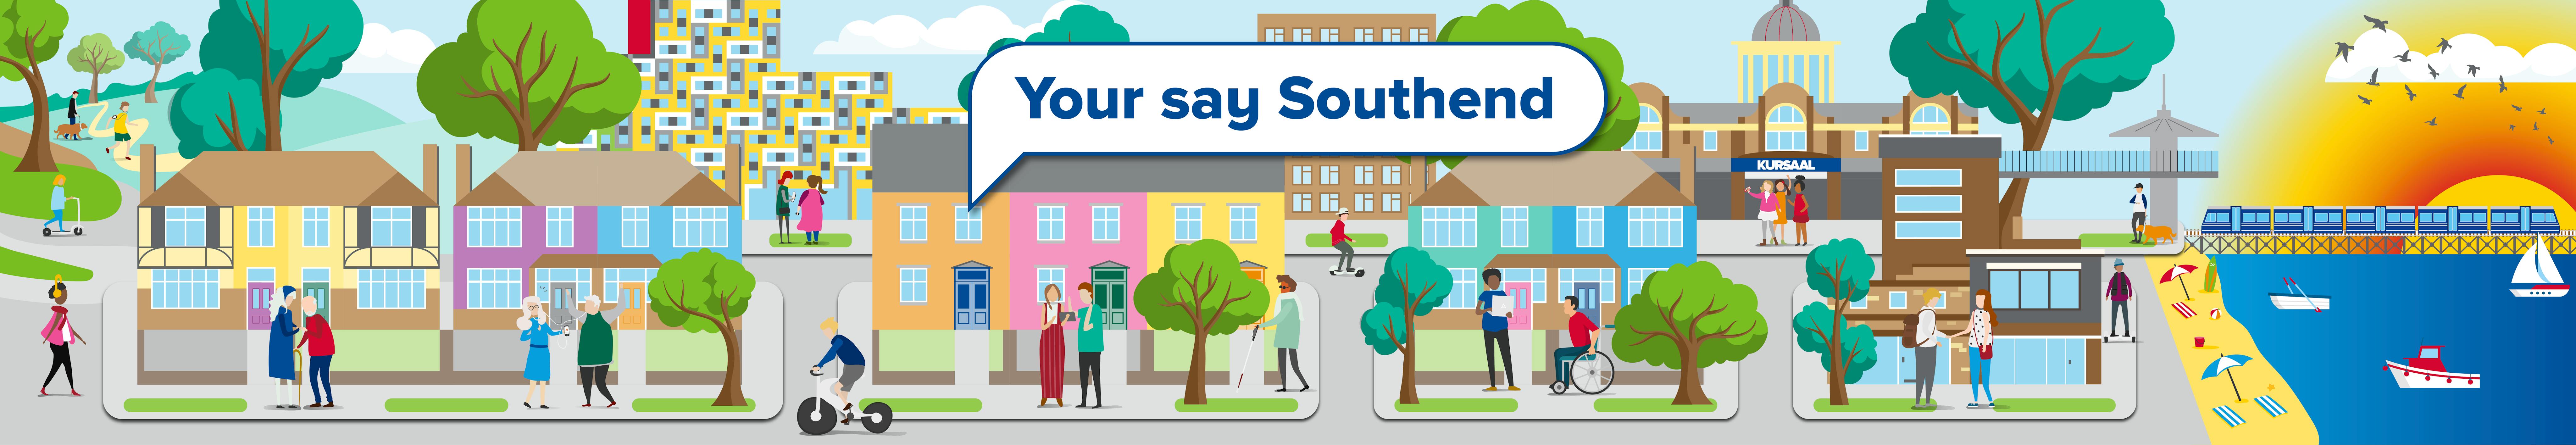 Your say Southend banner showing Southend's key landmarks